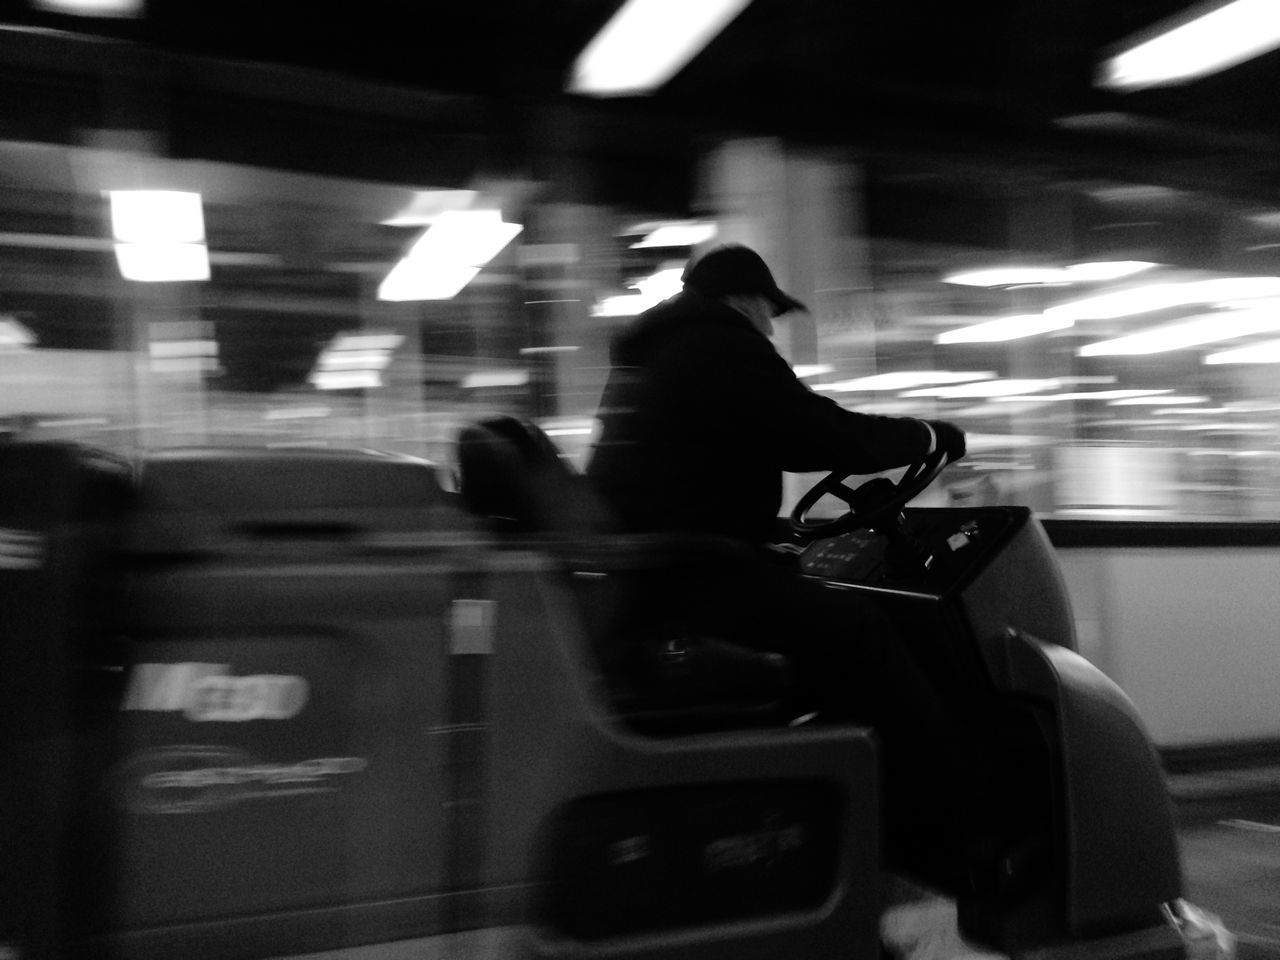 indoors, transportation, men, lifestyles, illuminated, mode of transport, public transportation, person, travel, blurred motion, leisure activity, on the move, rear view, land vehicle, unrecognizable person, passenger, silhouette